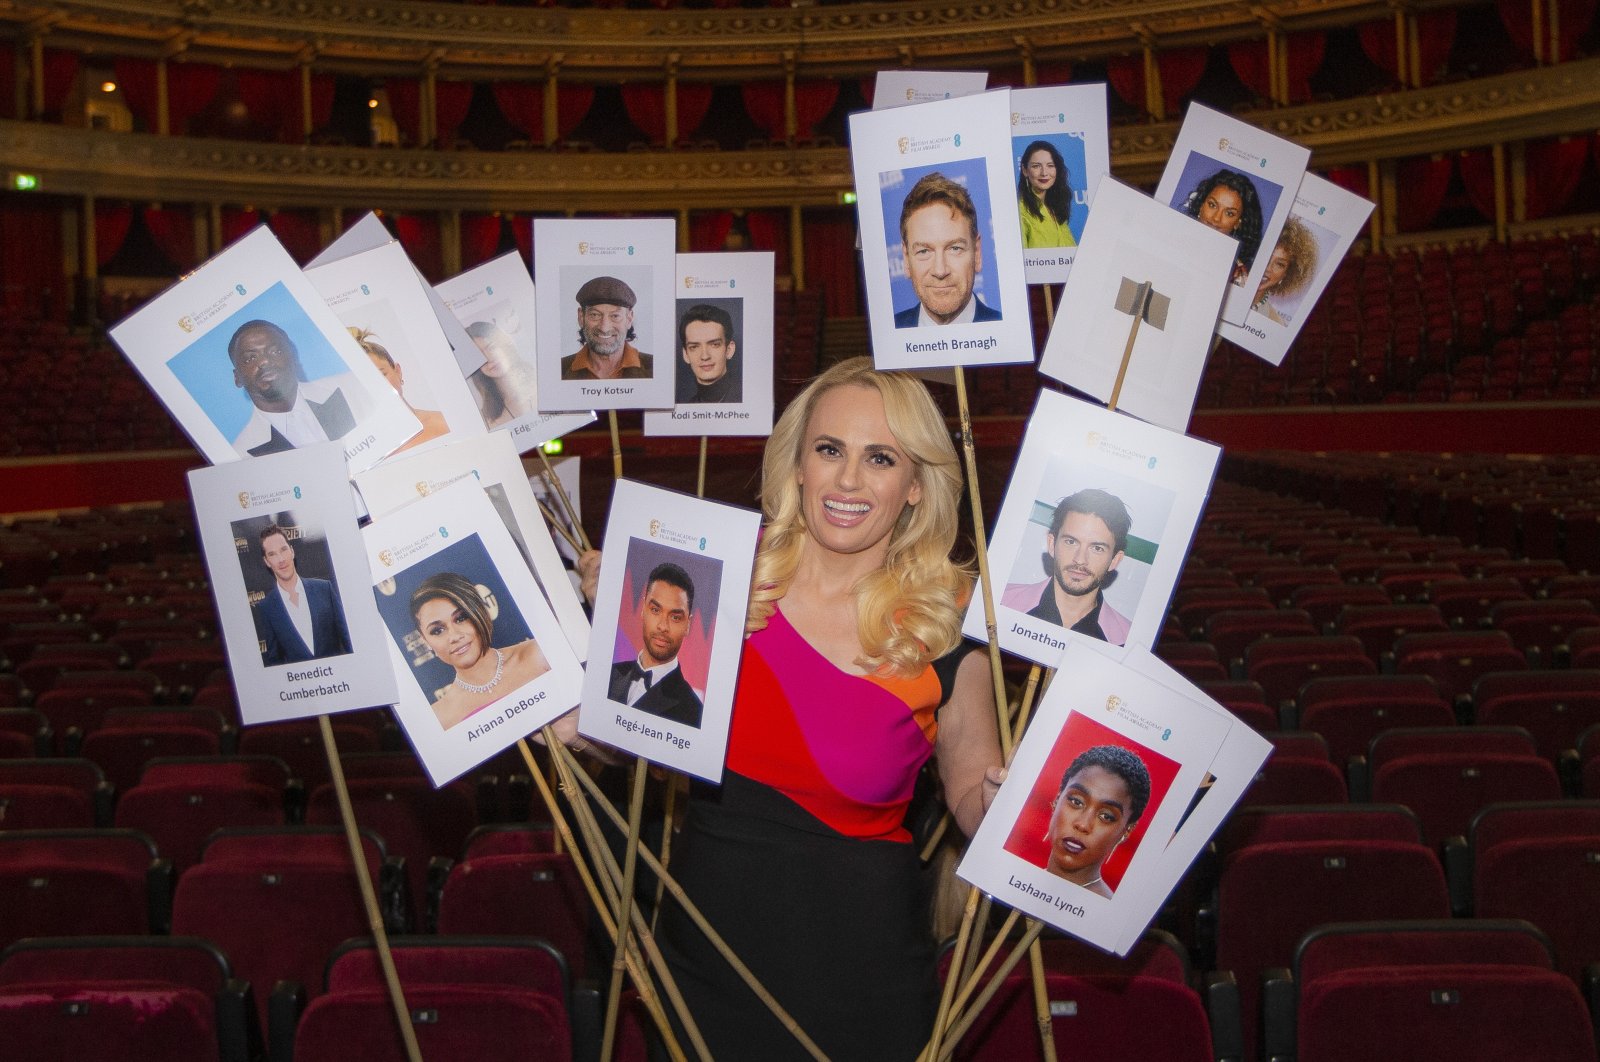 Rebel Wilson poses for photographers amongst the seating plan ahead of the British Academy Film Awards on that take place on Sunday, March 13, at the Royal Albert Hall in central London, Tuesday, March 8, 2022. (AP)